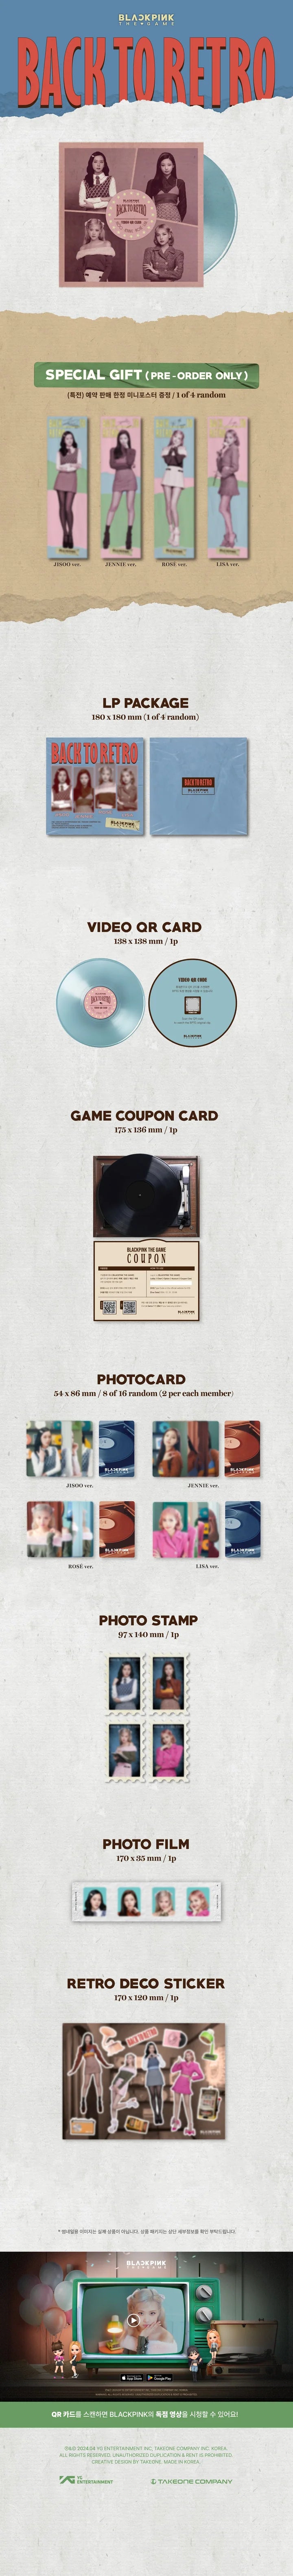 BLACKPINK - THE GAME PHOTOCARD COLLECTION BACK TO RETRO Infographic